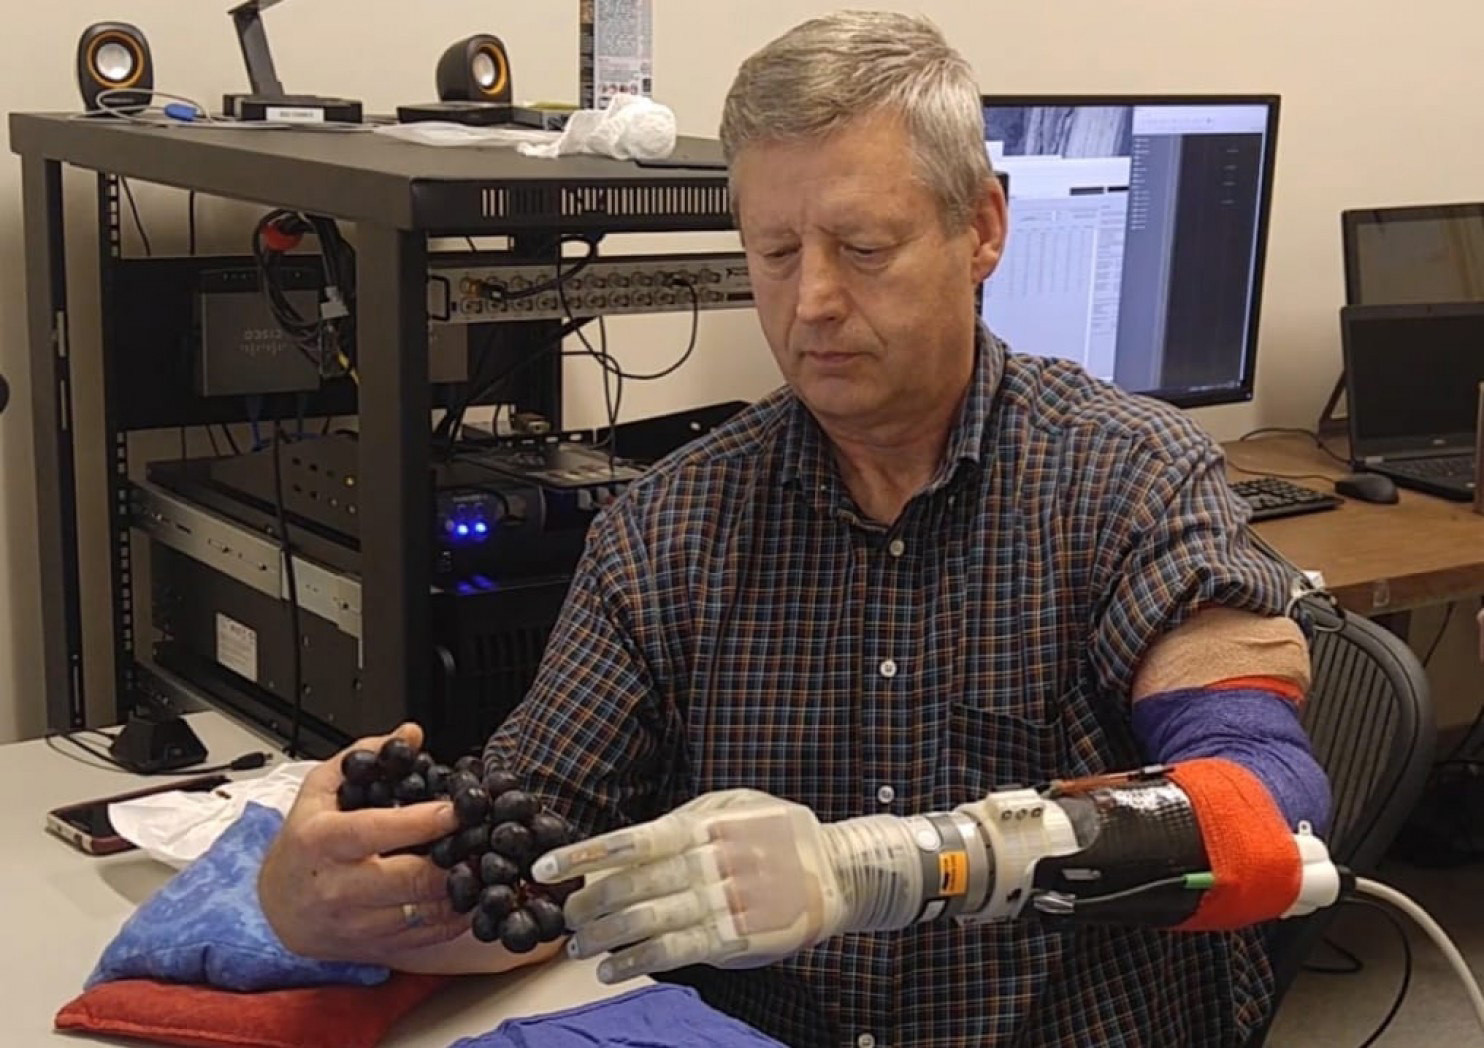 New robotic hand named after Luke Skywalker helps amputee touch and